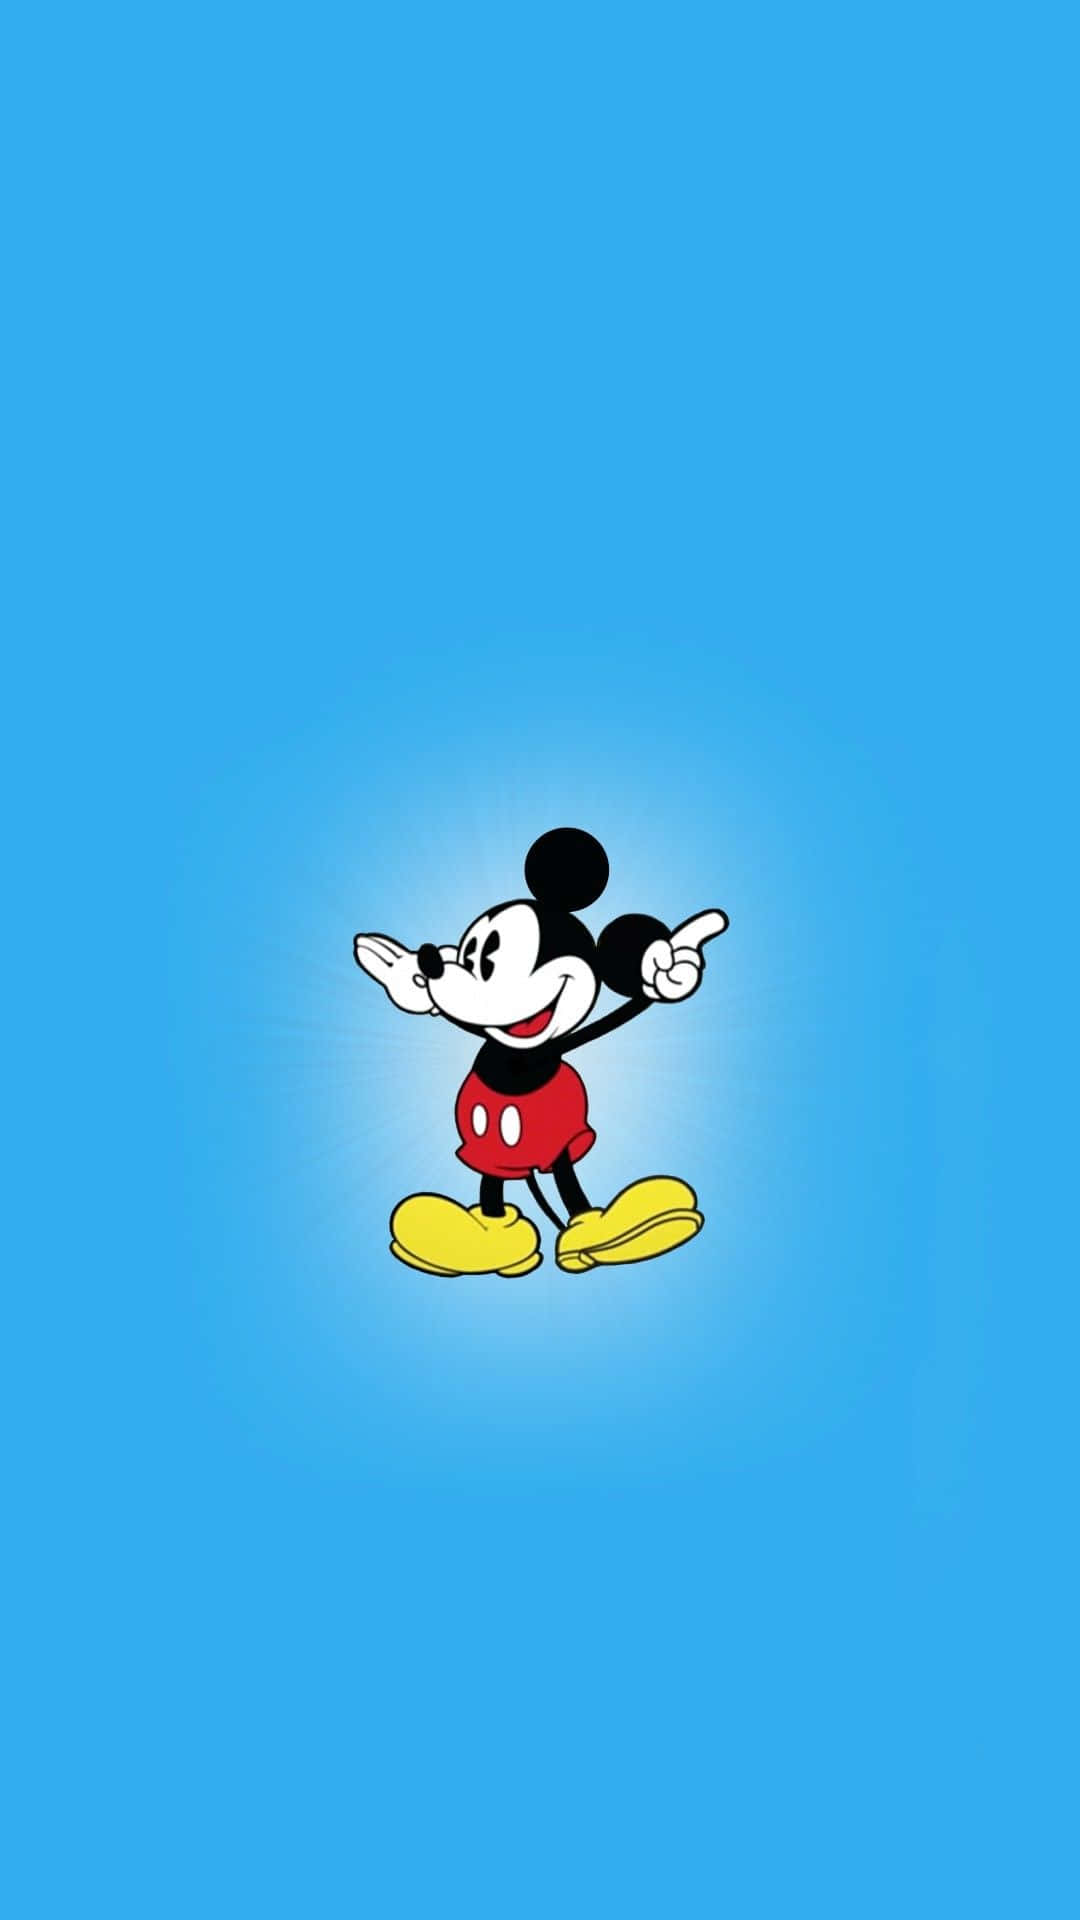 Free Mickey Mouse Iphone Wallpaper Downloads, [100+] Mickey Mouse ...